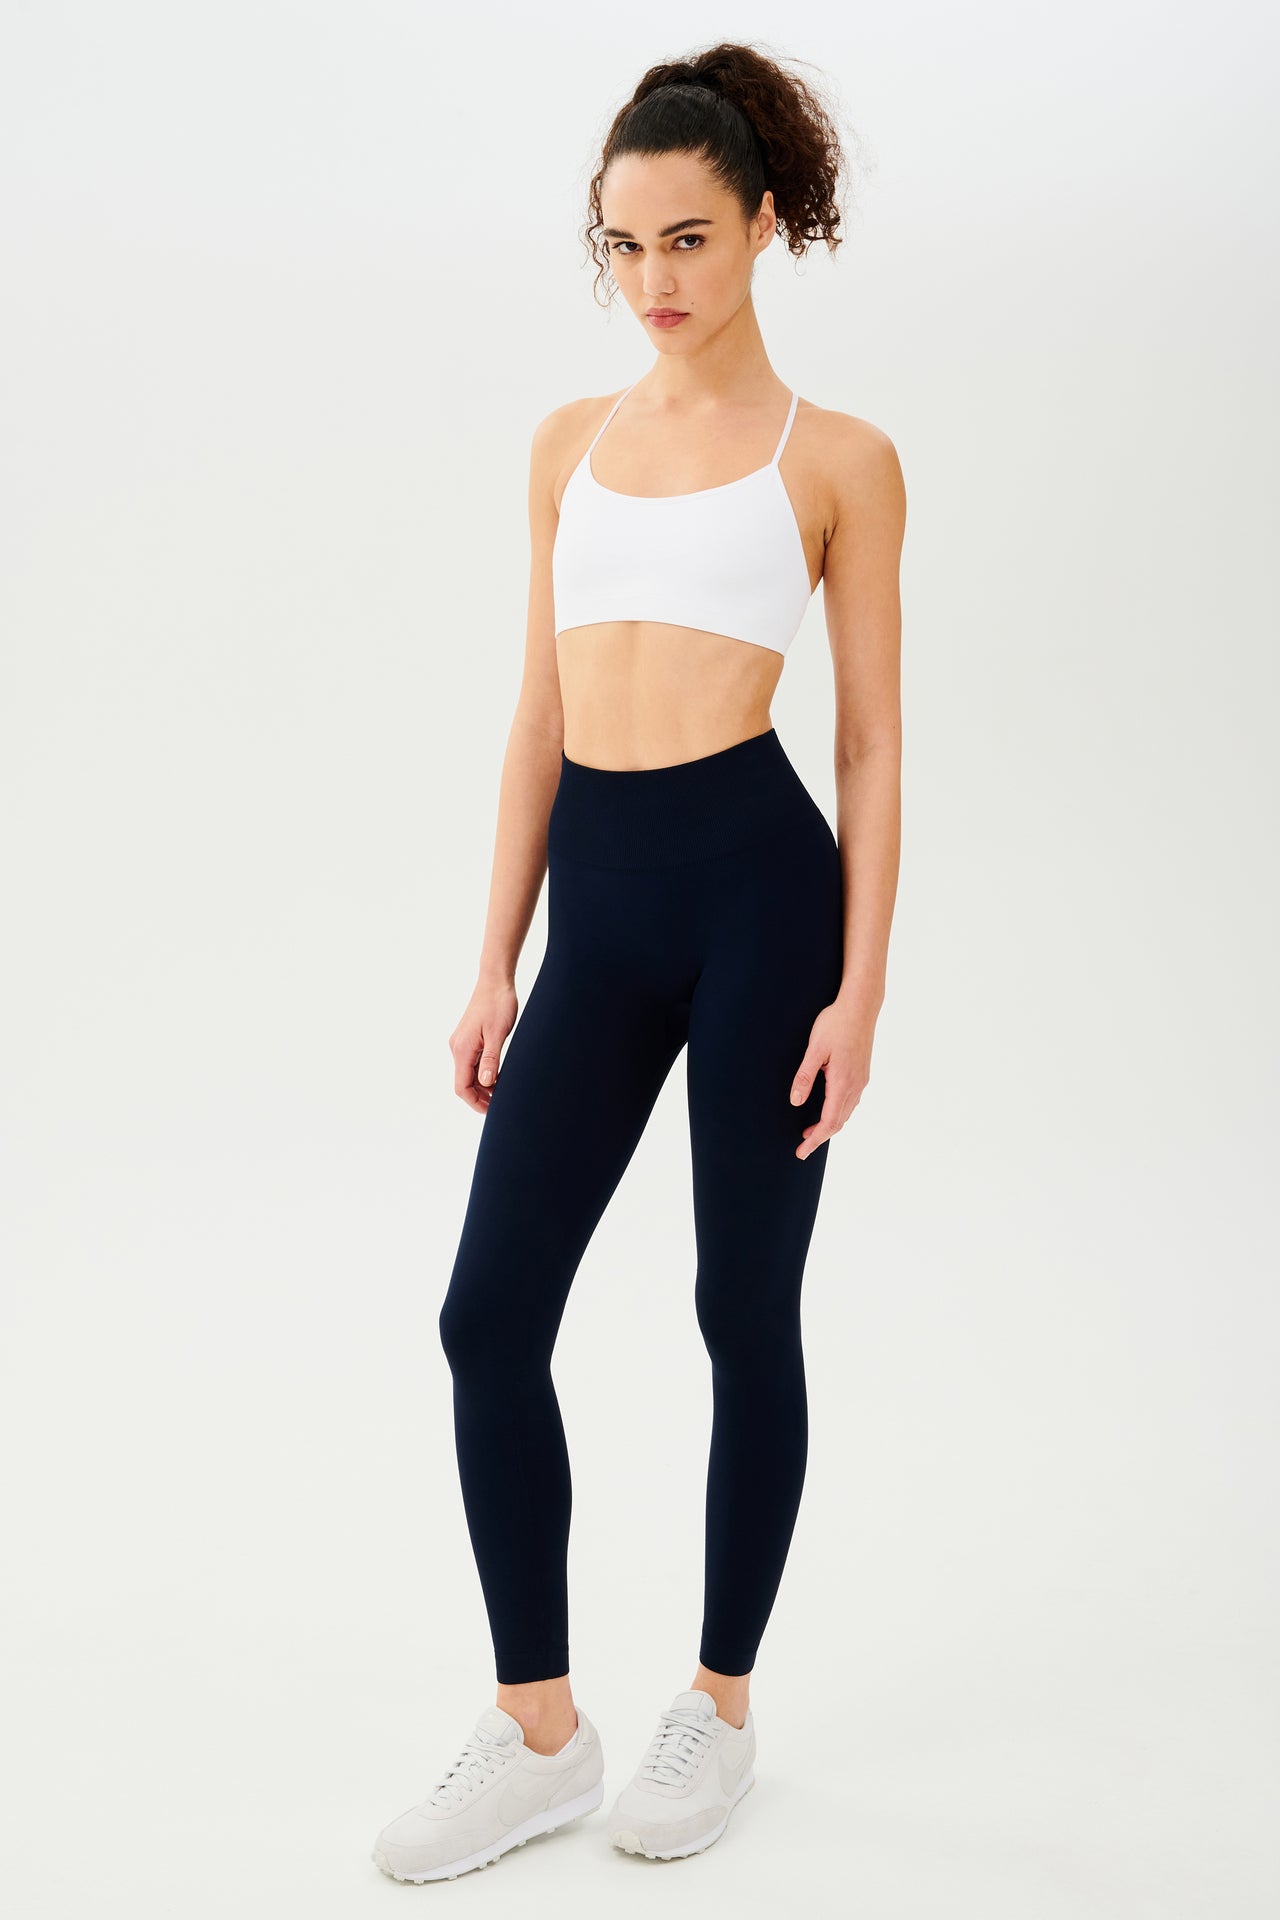 The model is wearing a white top and SPLITS59 navy Loren Seamless High Waist Full Length leggings, perfect for enhancing your workout experience.